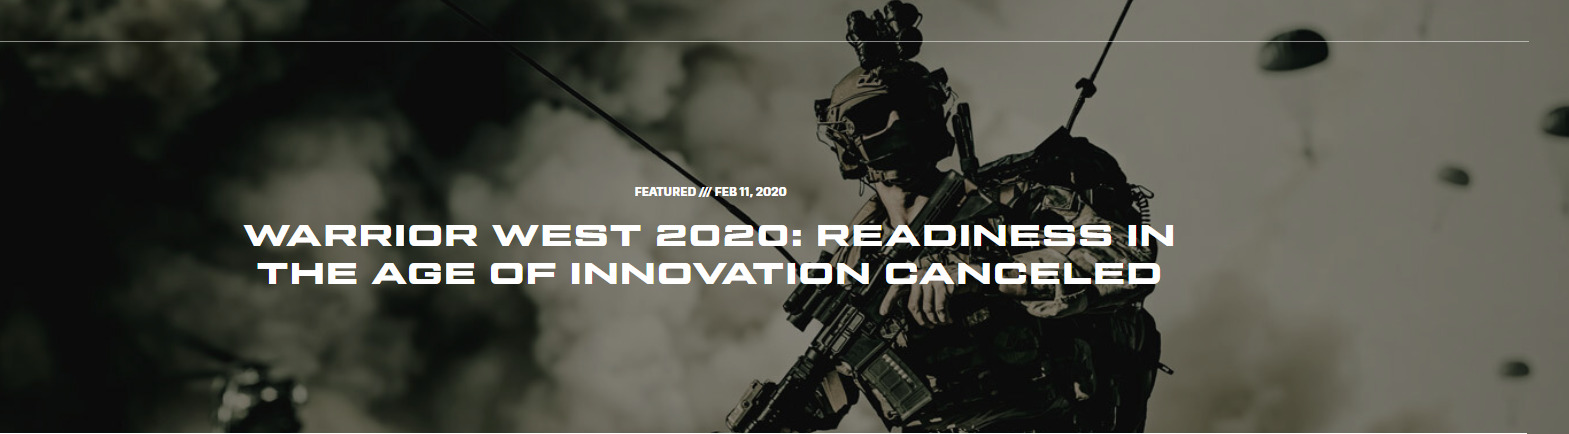 Warrior West 2020: Readiness in the Age of Innovation Canceled banner.